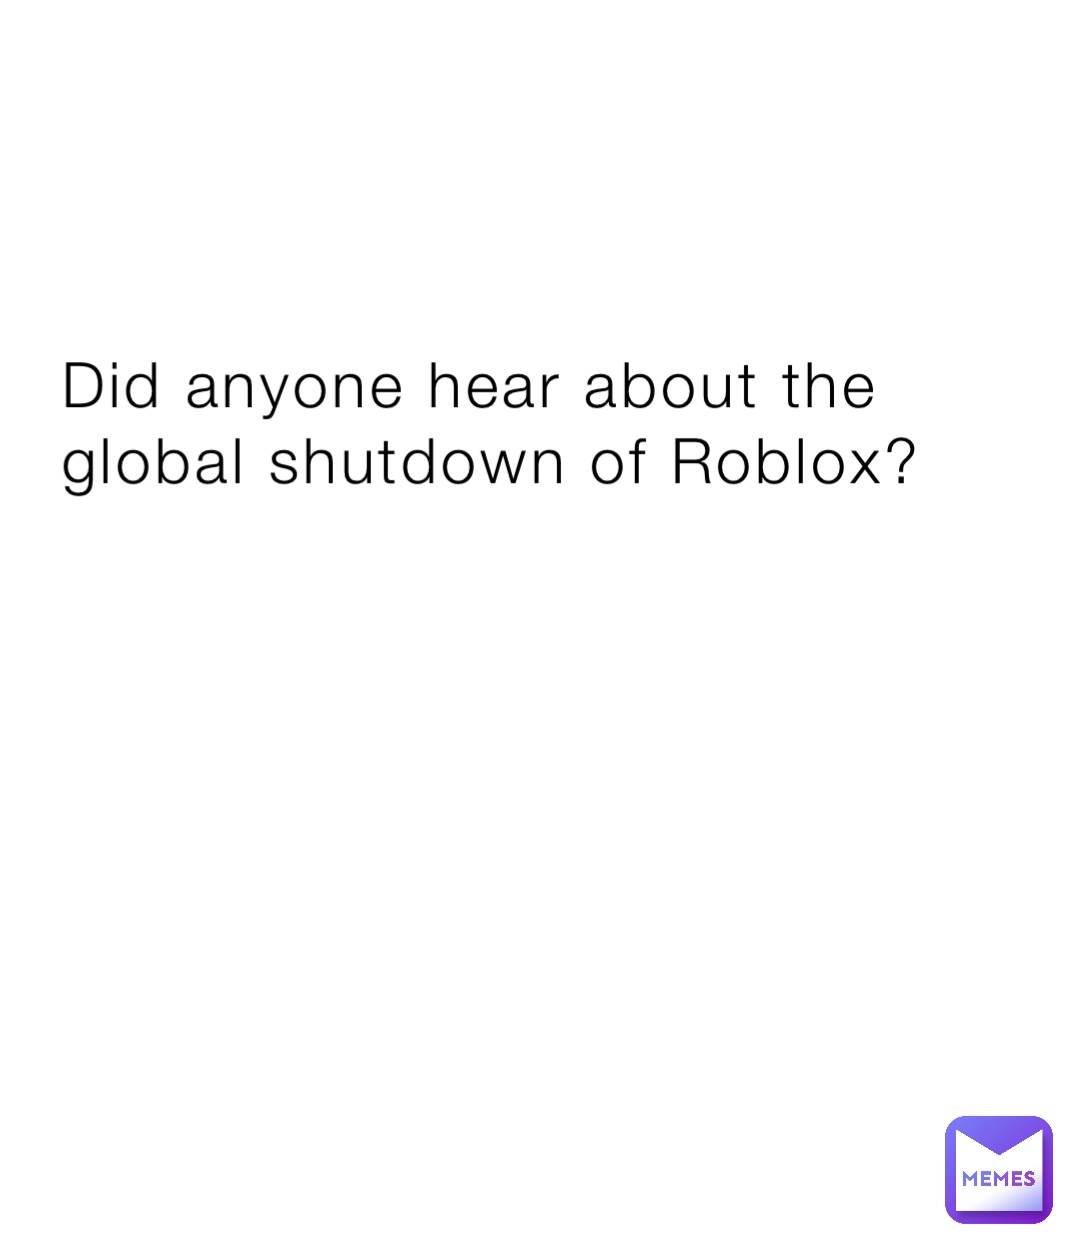 Did anyone hear about the global shutdown of Roblox?